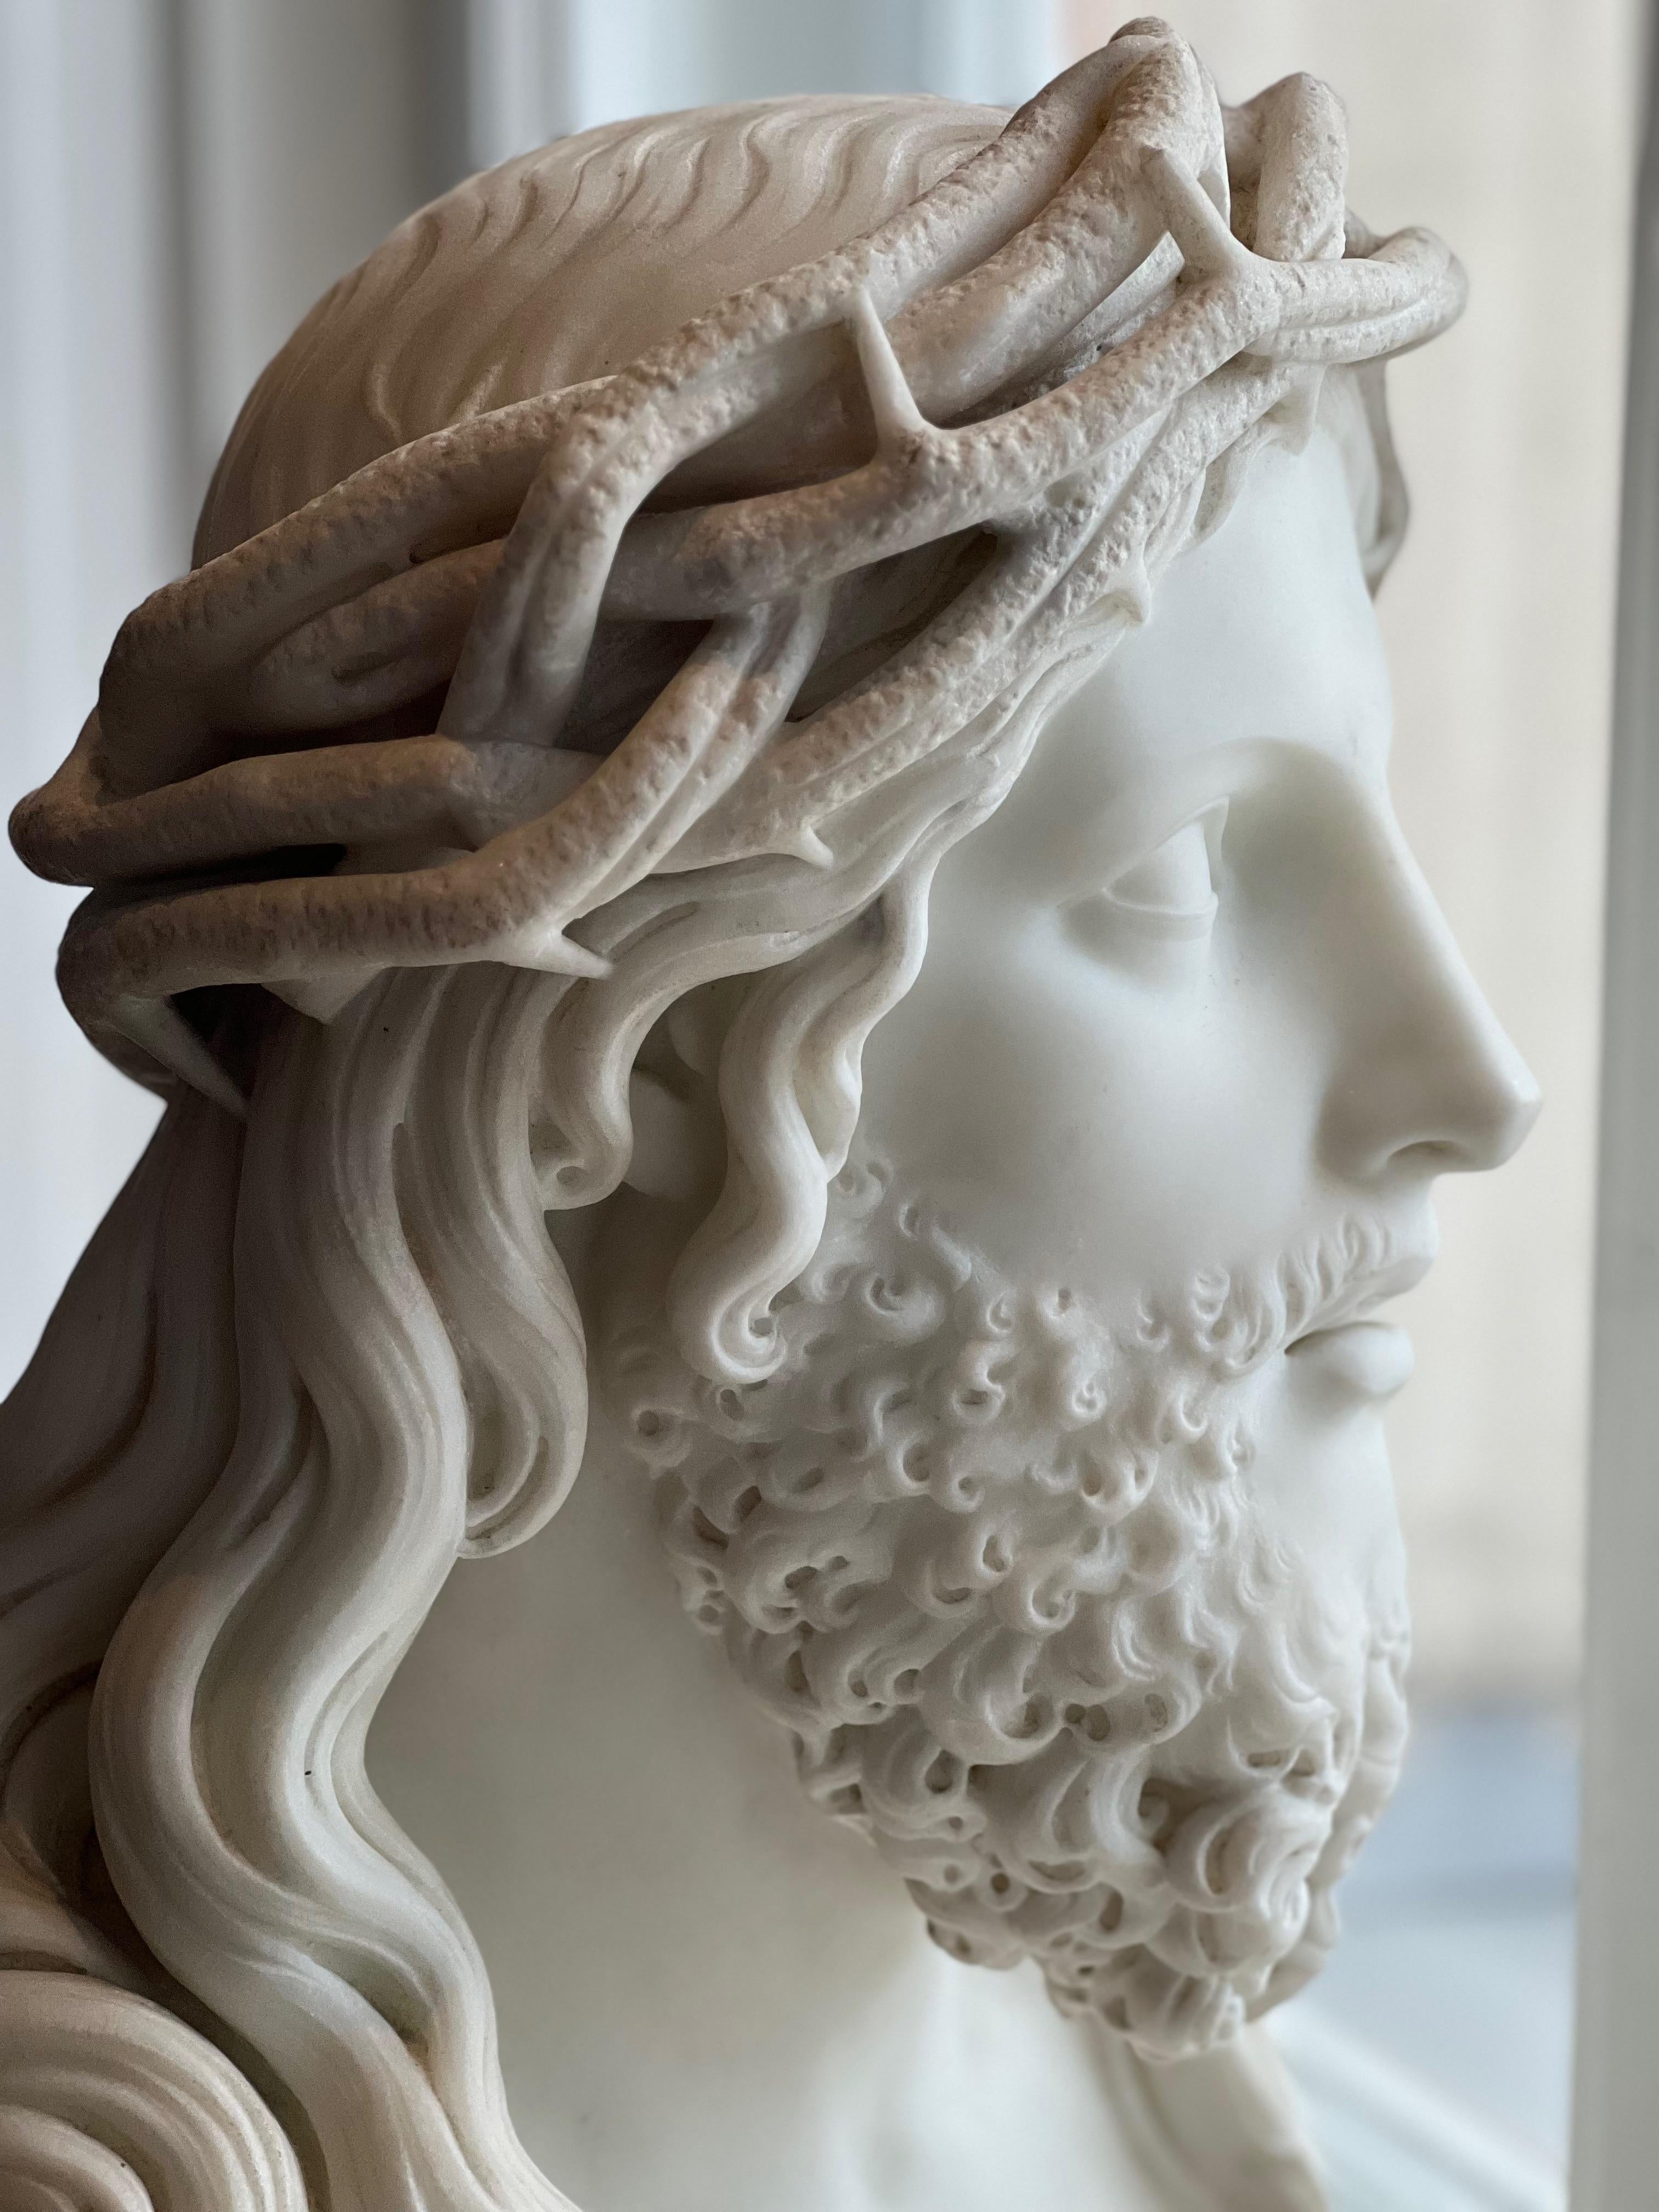 Unknown Figurative Sculpture - Marble Bust, Ecce Homo, Christ with Crown of Thorns 